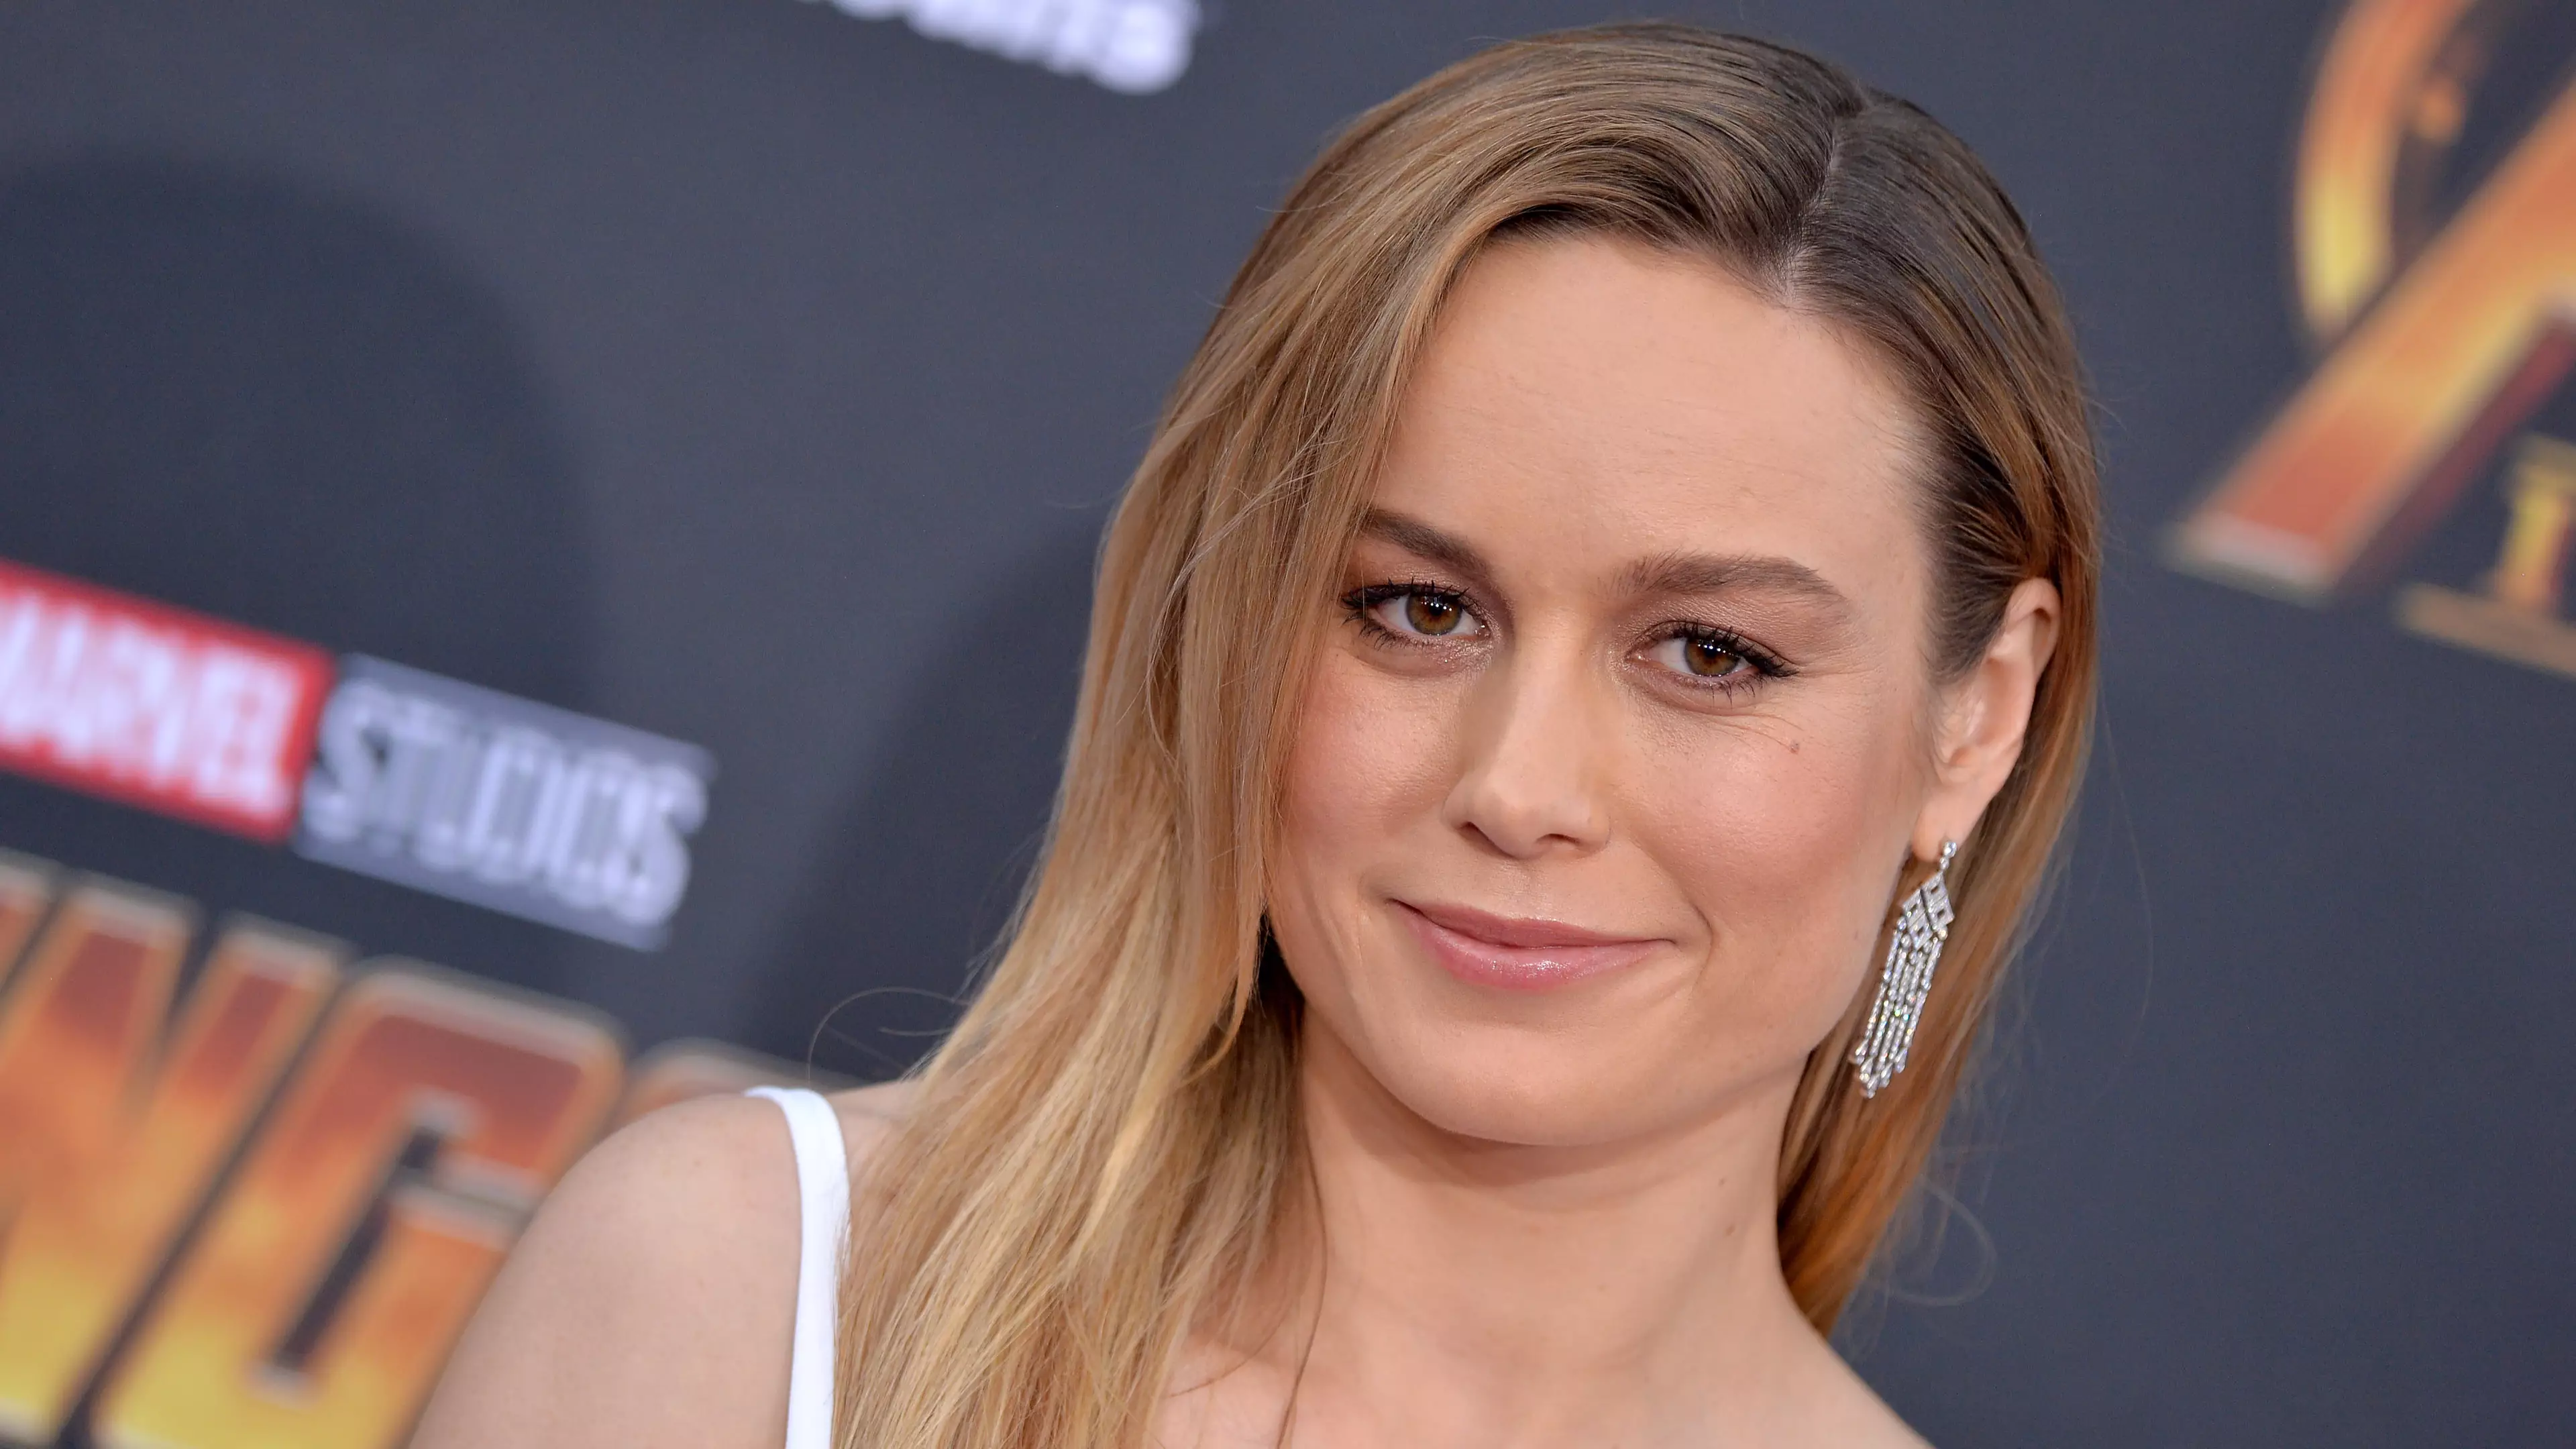 Brie Larson's Response To Men Telling Her To Smile Will Go Down In History